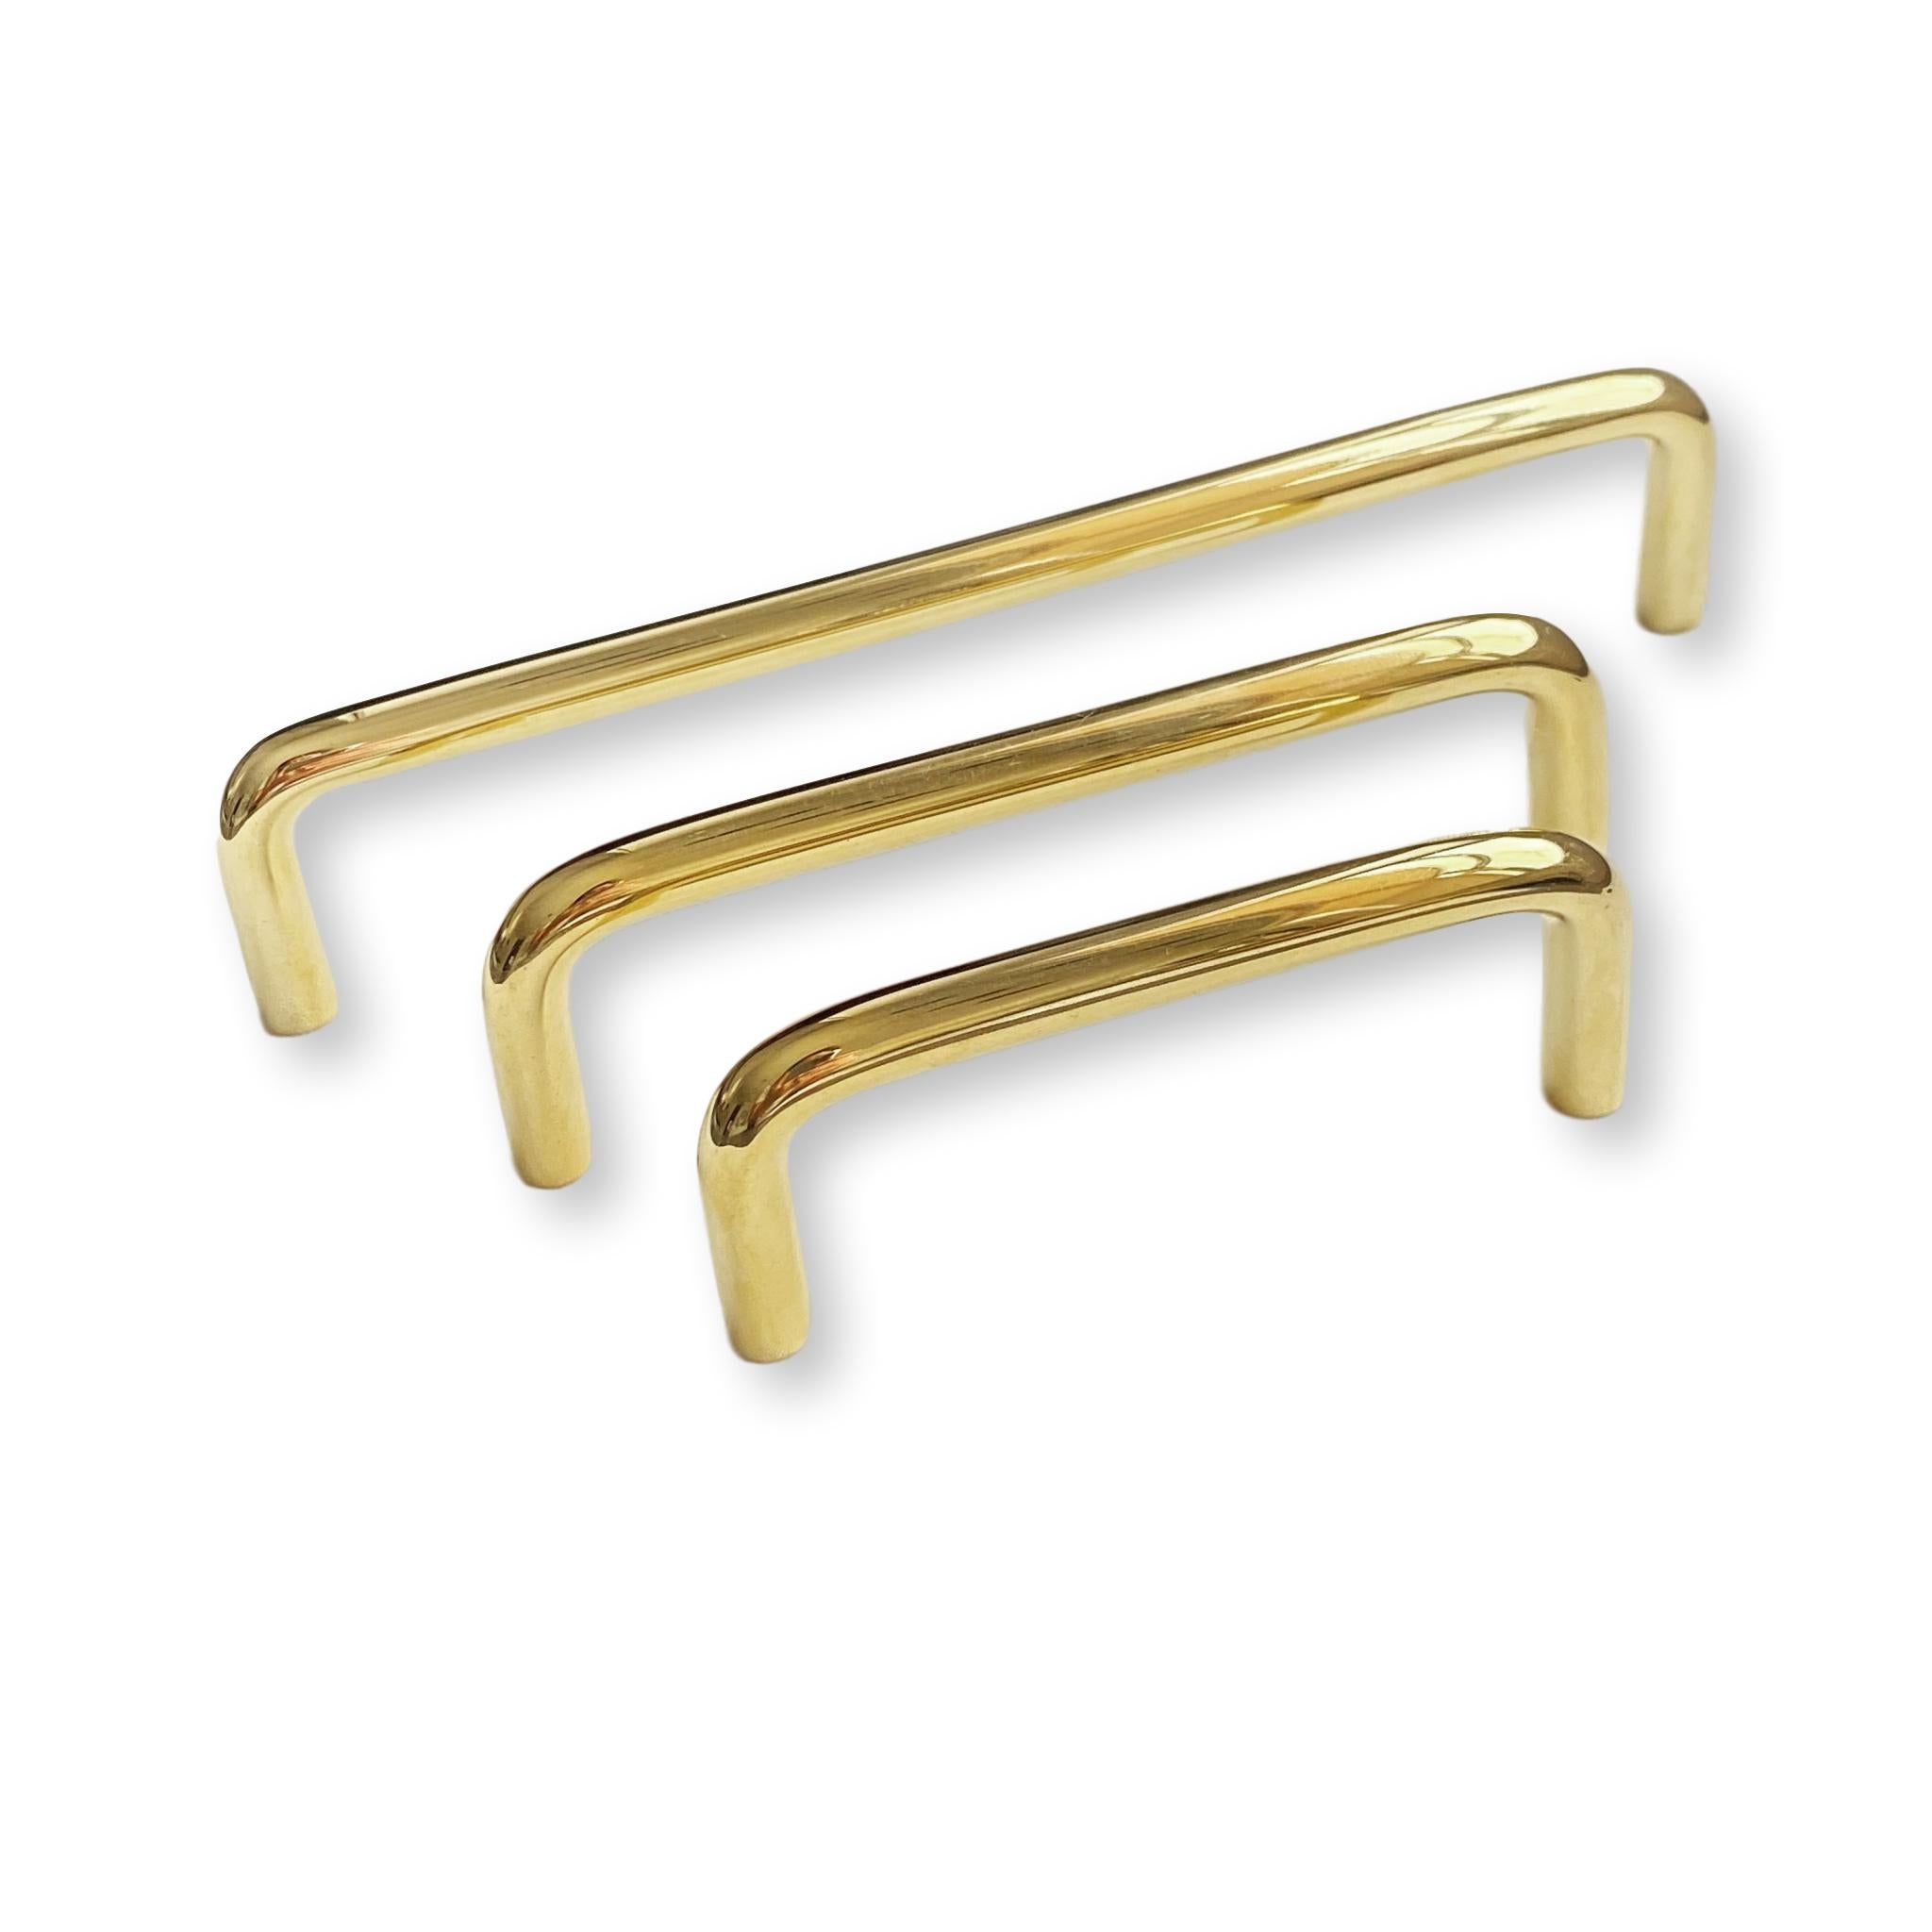 Unlacquered Polished Brass "Wire" Drawer Pulls - Cabinet Handles | Drawer Pull